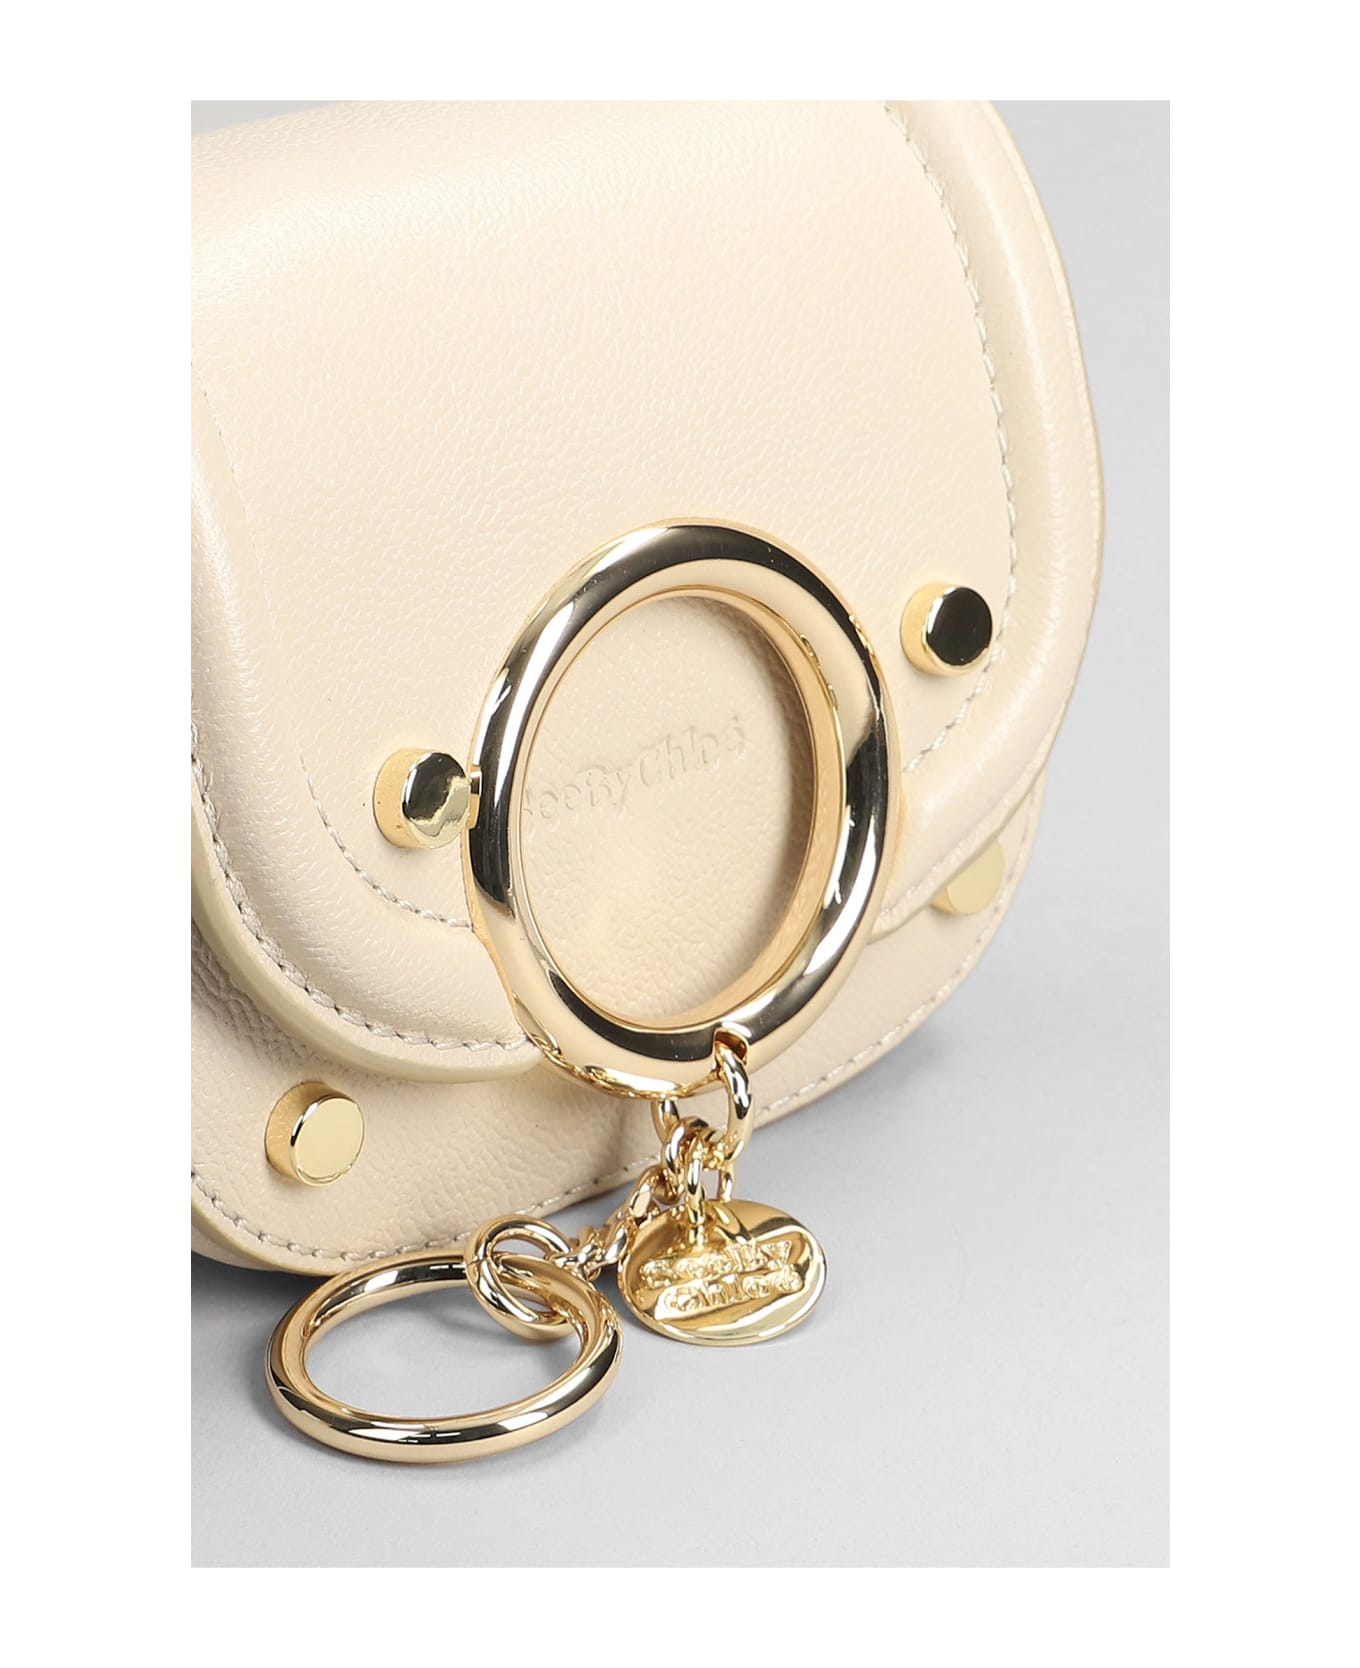 See by Chloé Mara Small Shoulder Bag In Beige Leather - beige